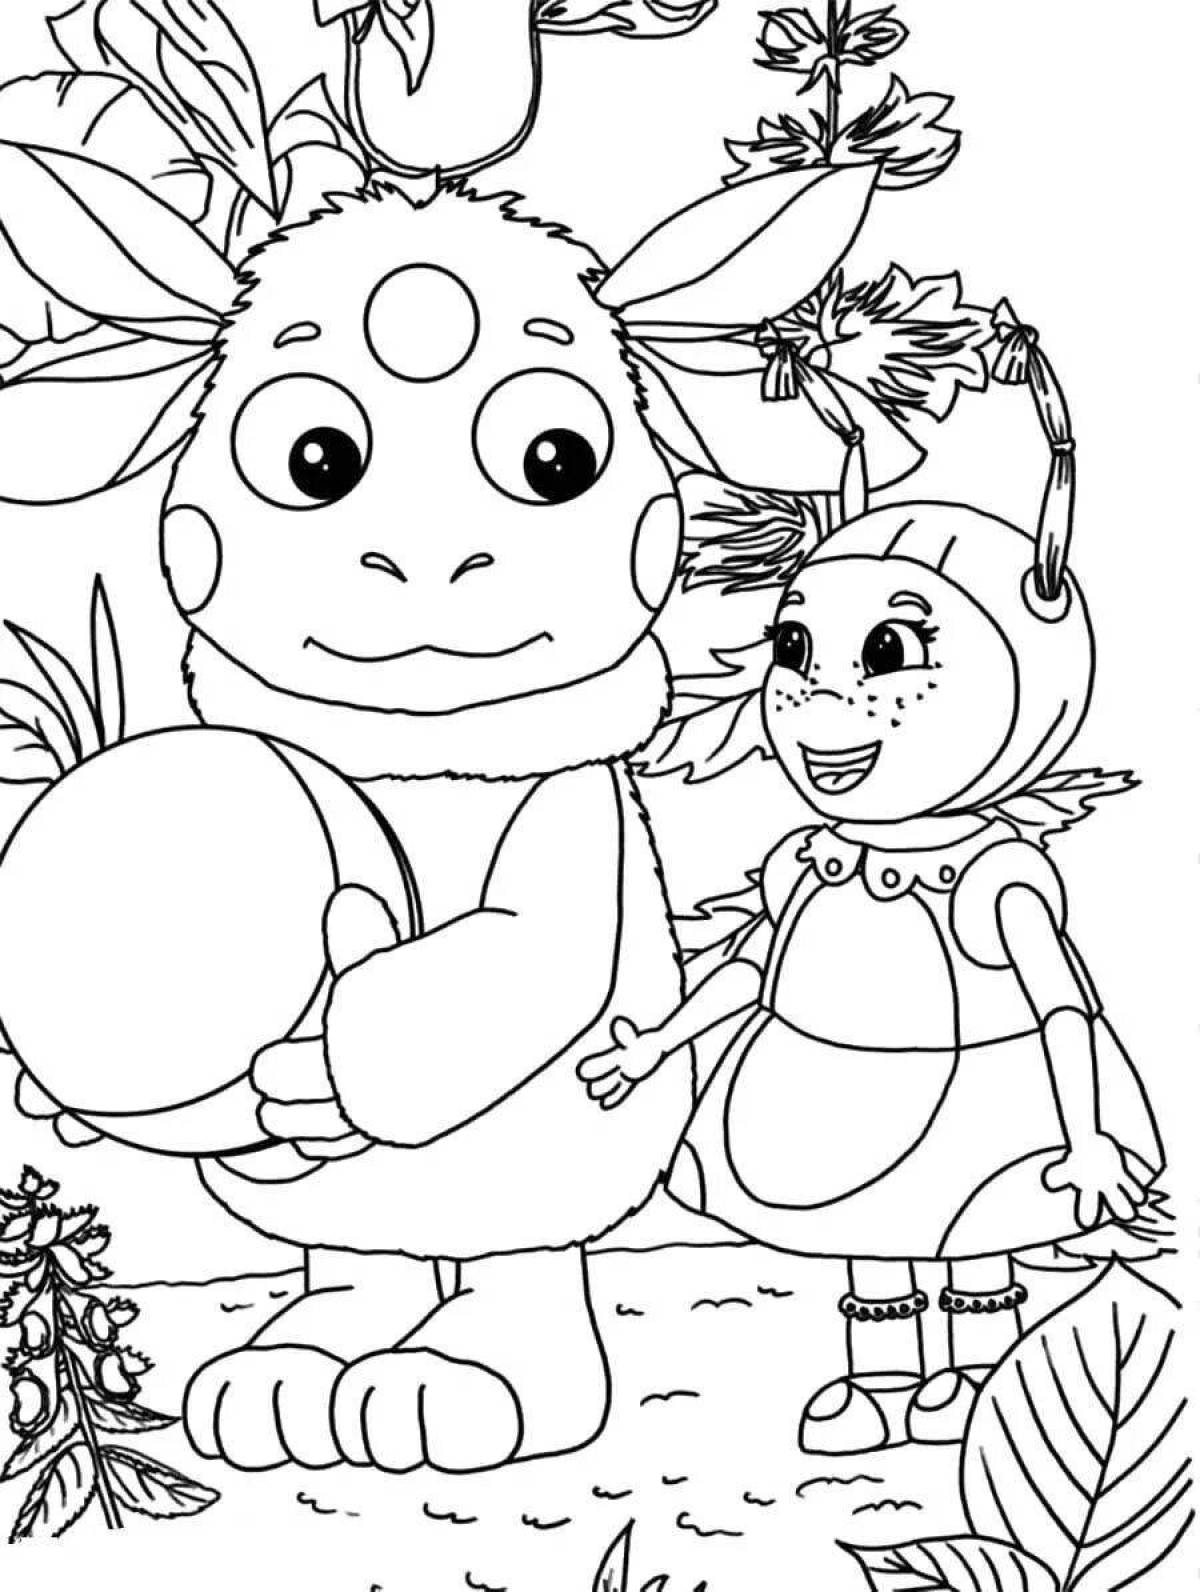 Charming Luntik coloring book for children 3 years old